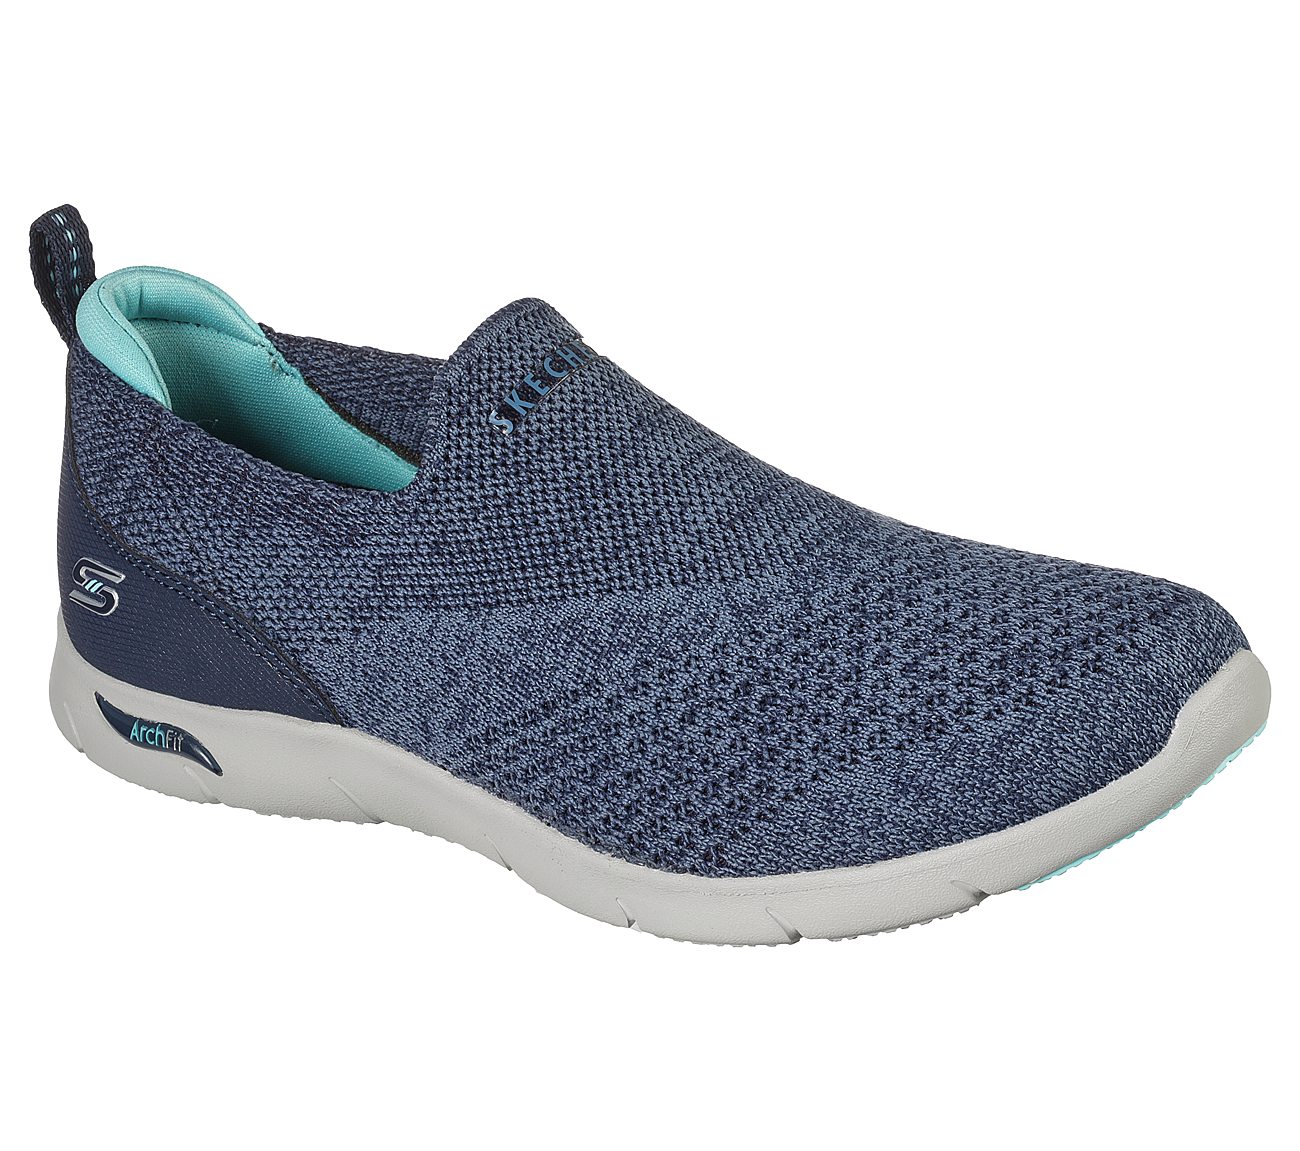 ARCH FIT REFINE - DON'T GO, NAVY/BLUE Footwear Lateral View